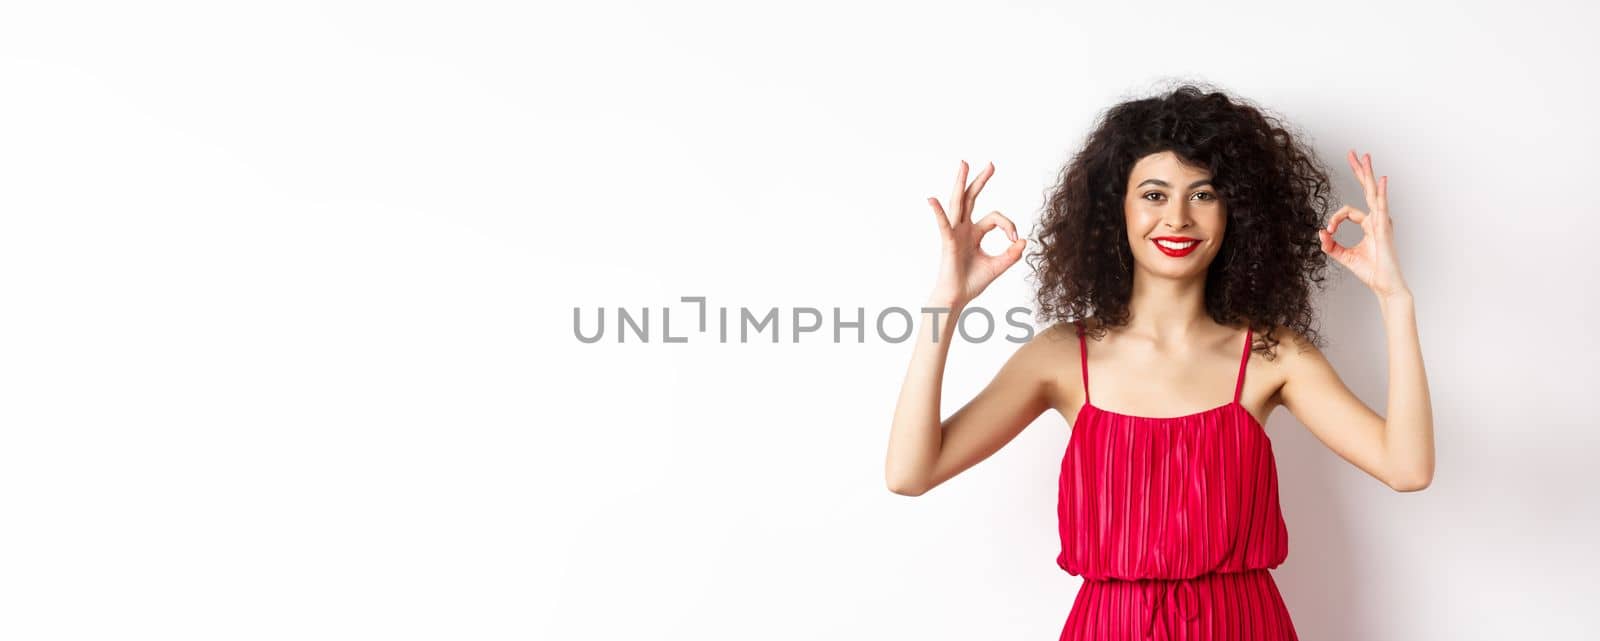 Beautiful woman in red dress, smiling and showing okay gestures, like something good, praising good job, standing over white background.